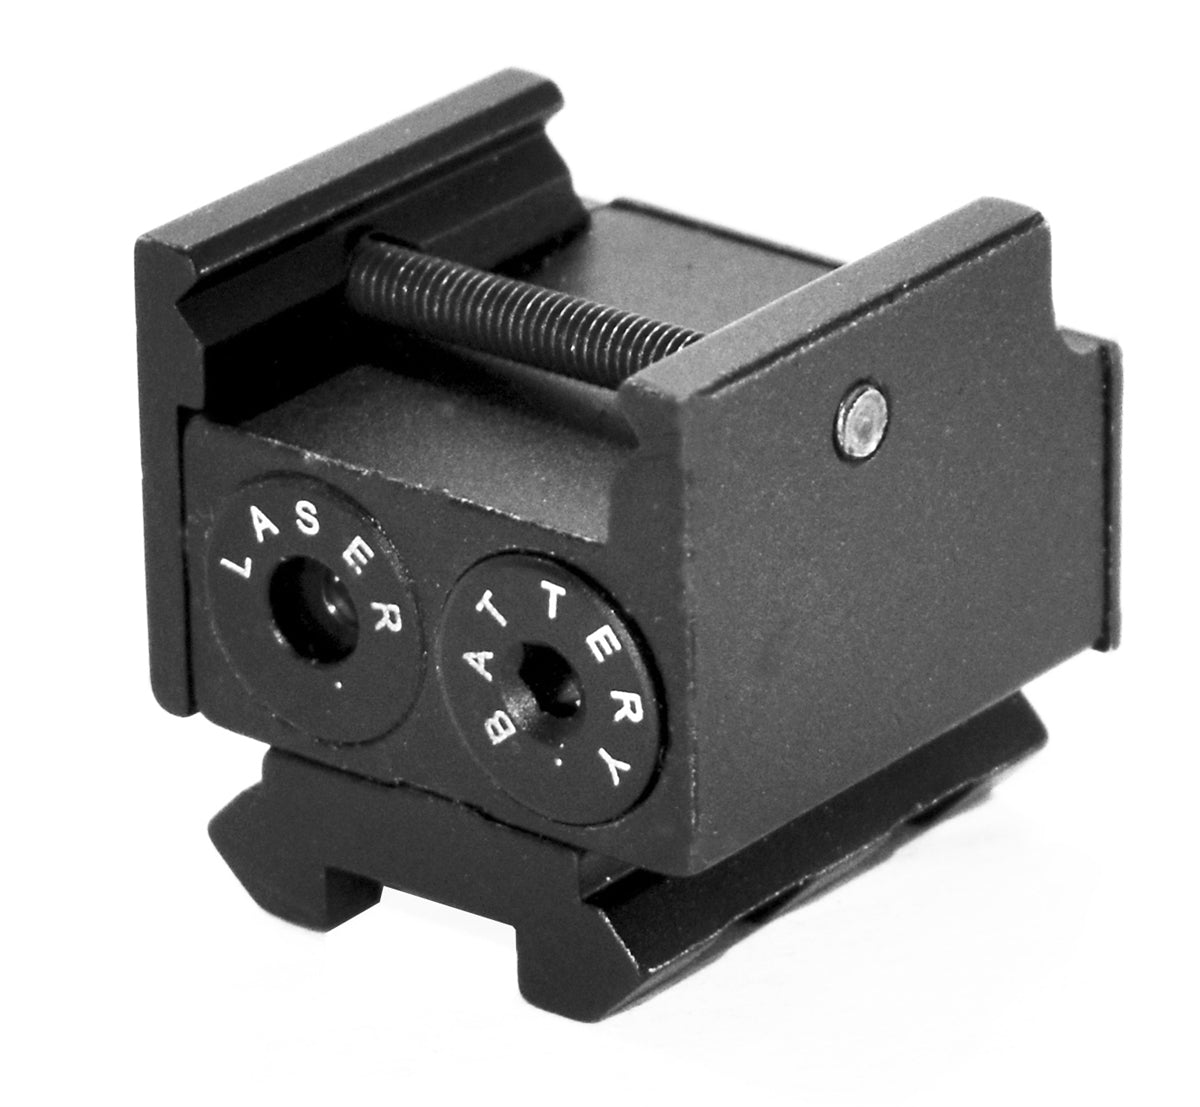 Trinity Compact red dot Sight for fn 509 Tactical Optics Home Defense Accessory Picatinny Weaver Mount Adapter Aluminum Black. - TRINITY SUPPLY INC